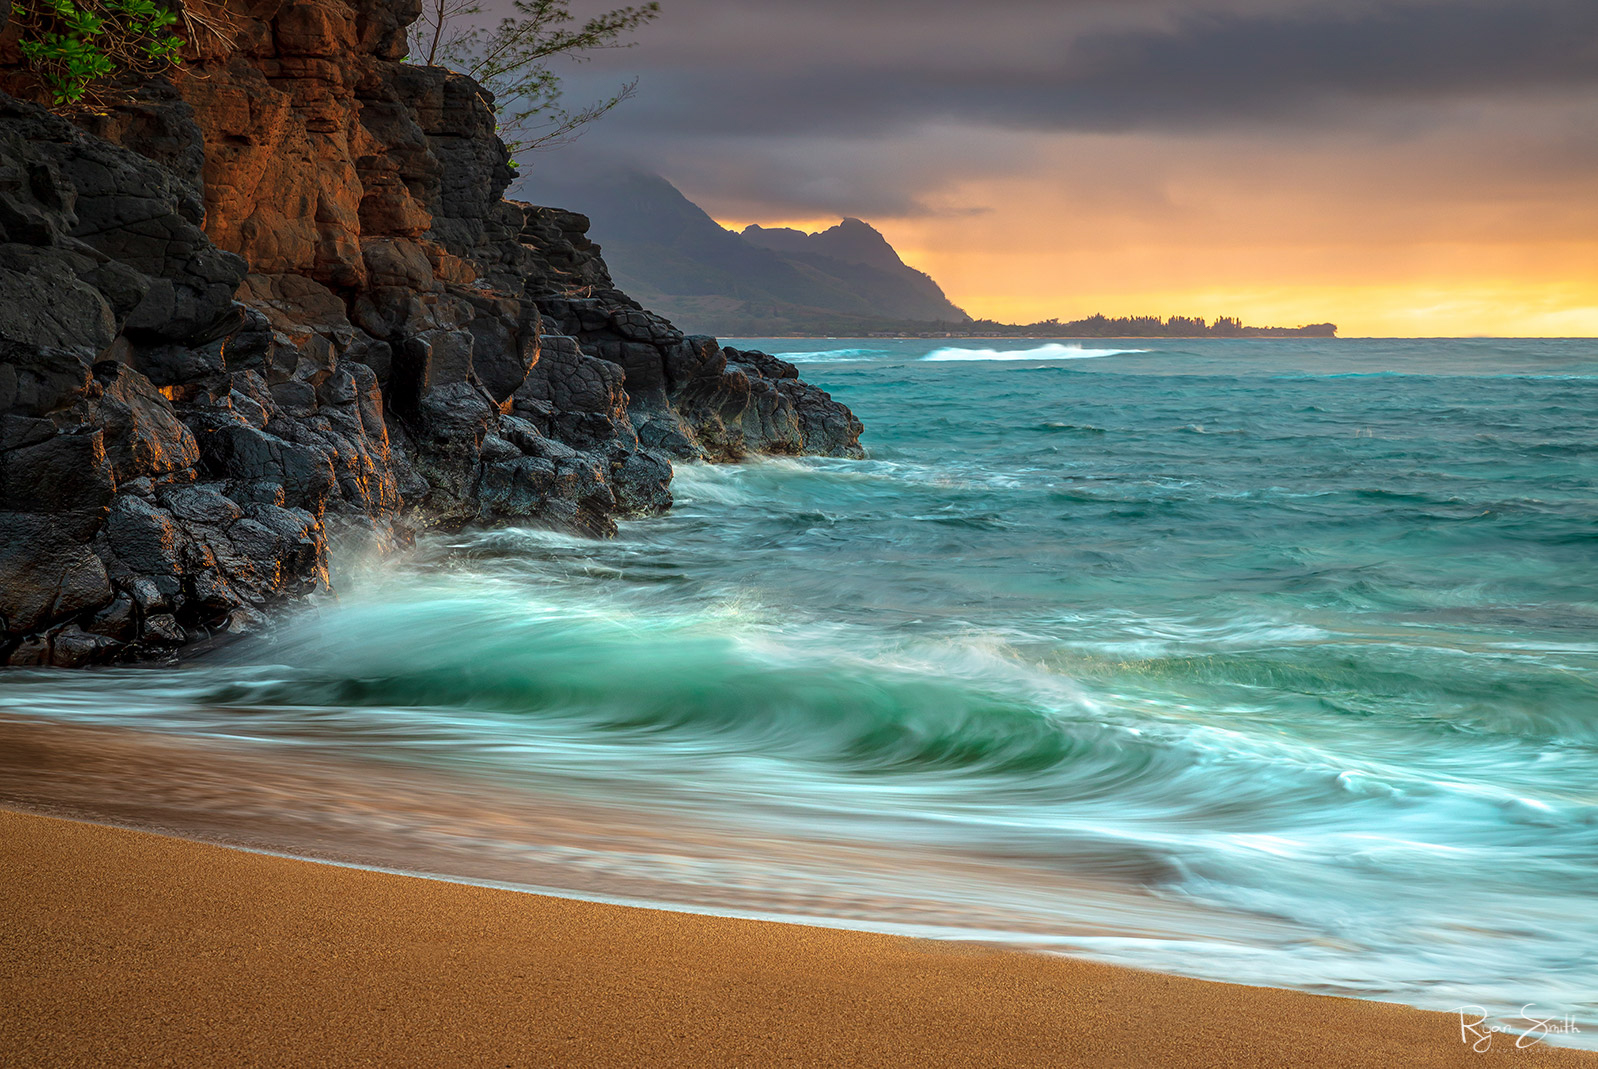 A shore is pictured with large rocks on the left and a vibrant orange sunset while aqua blue waves kiss the shore. 